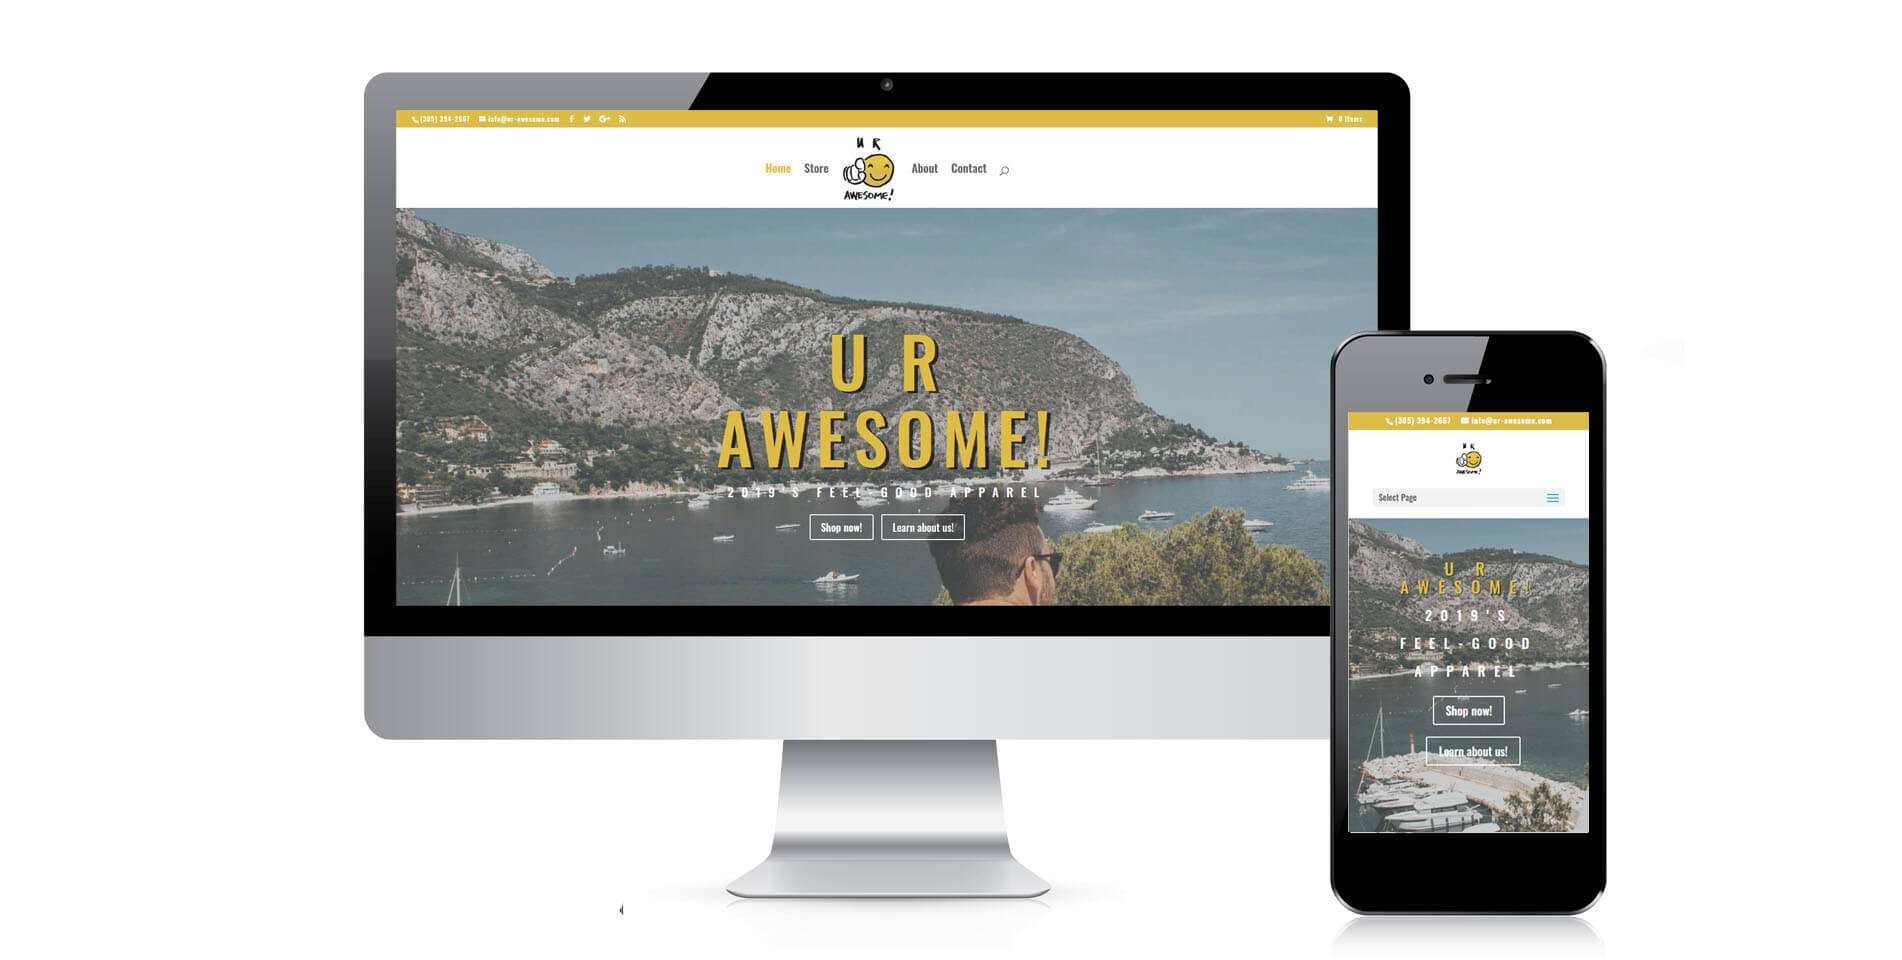 An image of the responsive design of UR Awesome, website created by Not Fade Away Marketing